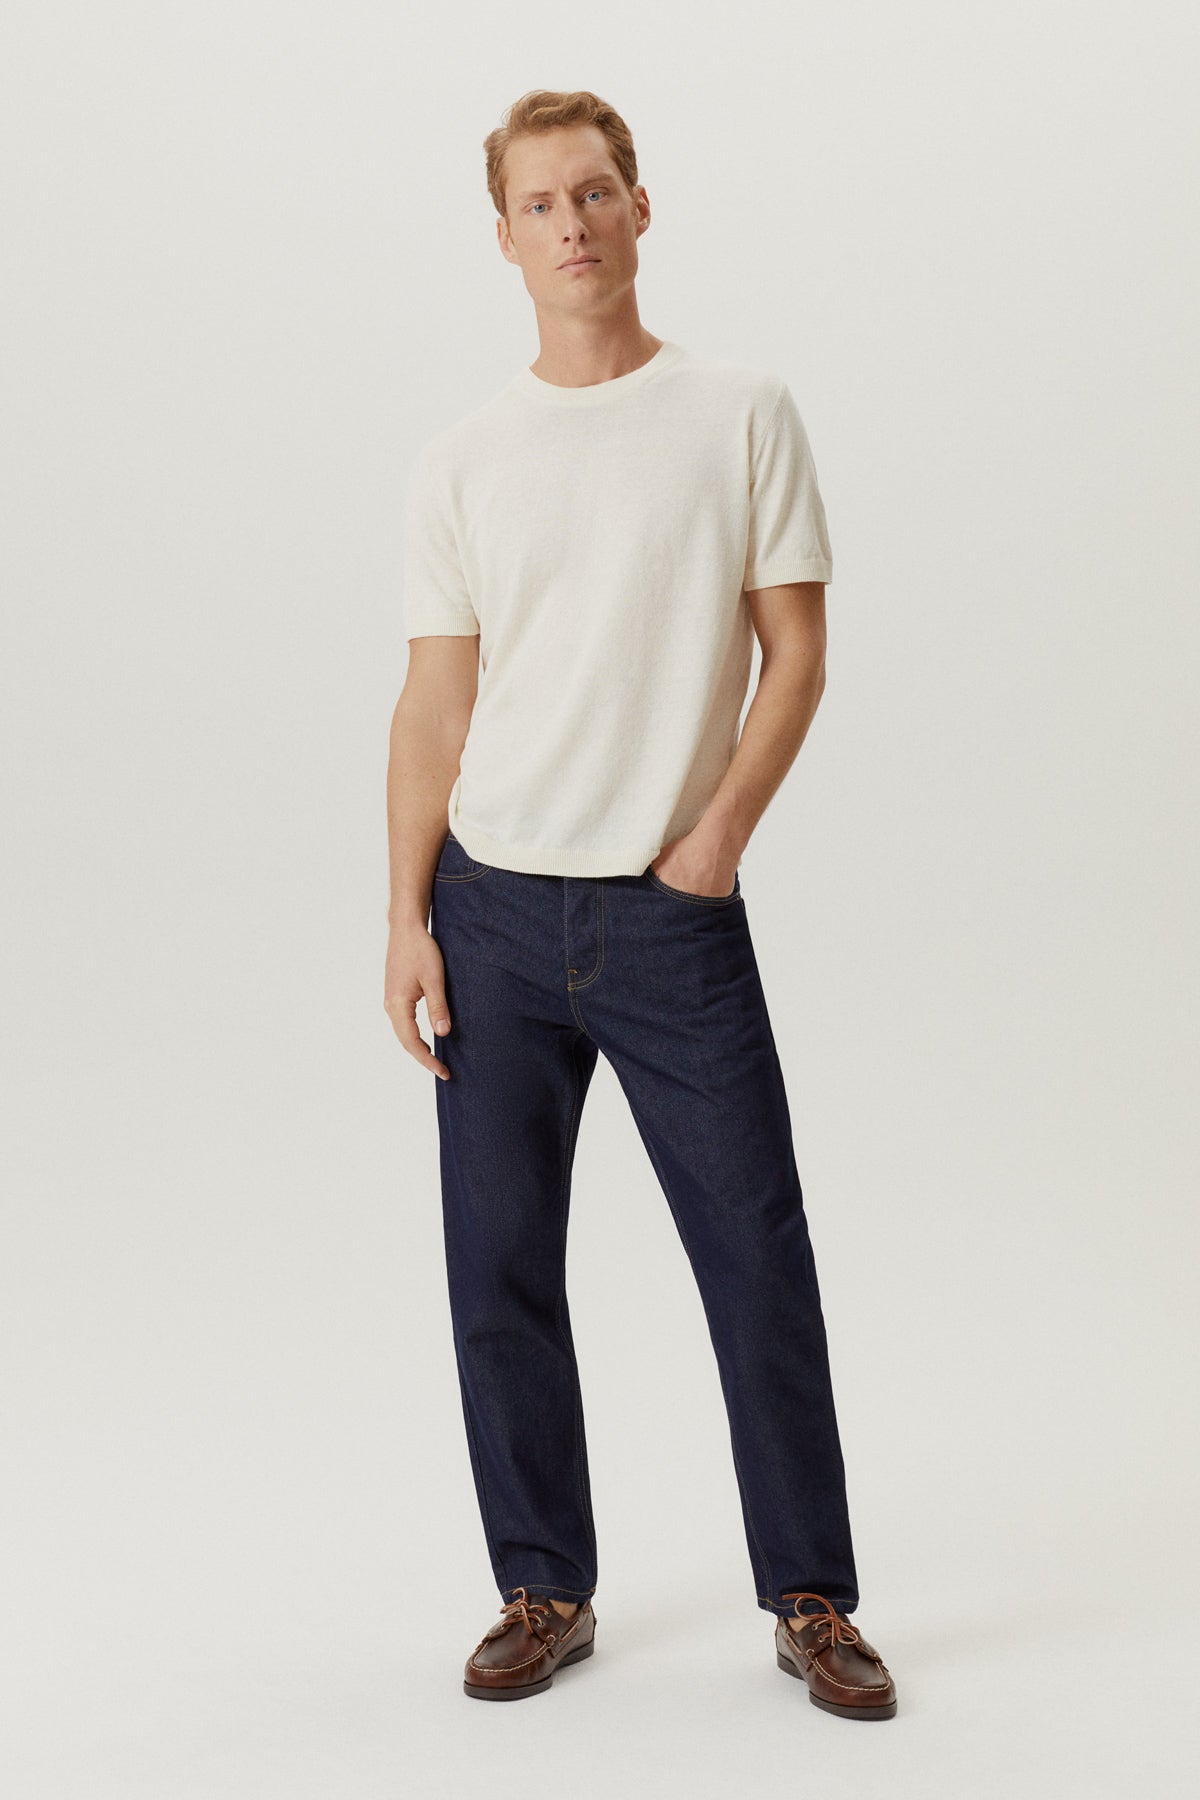 The Linen Cotton Knit T-Shirt | Sustainable Knitwear